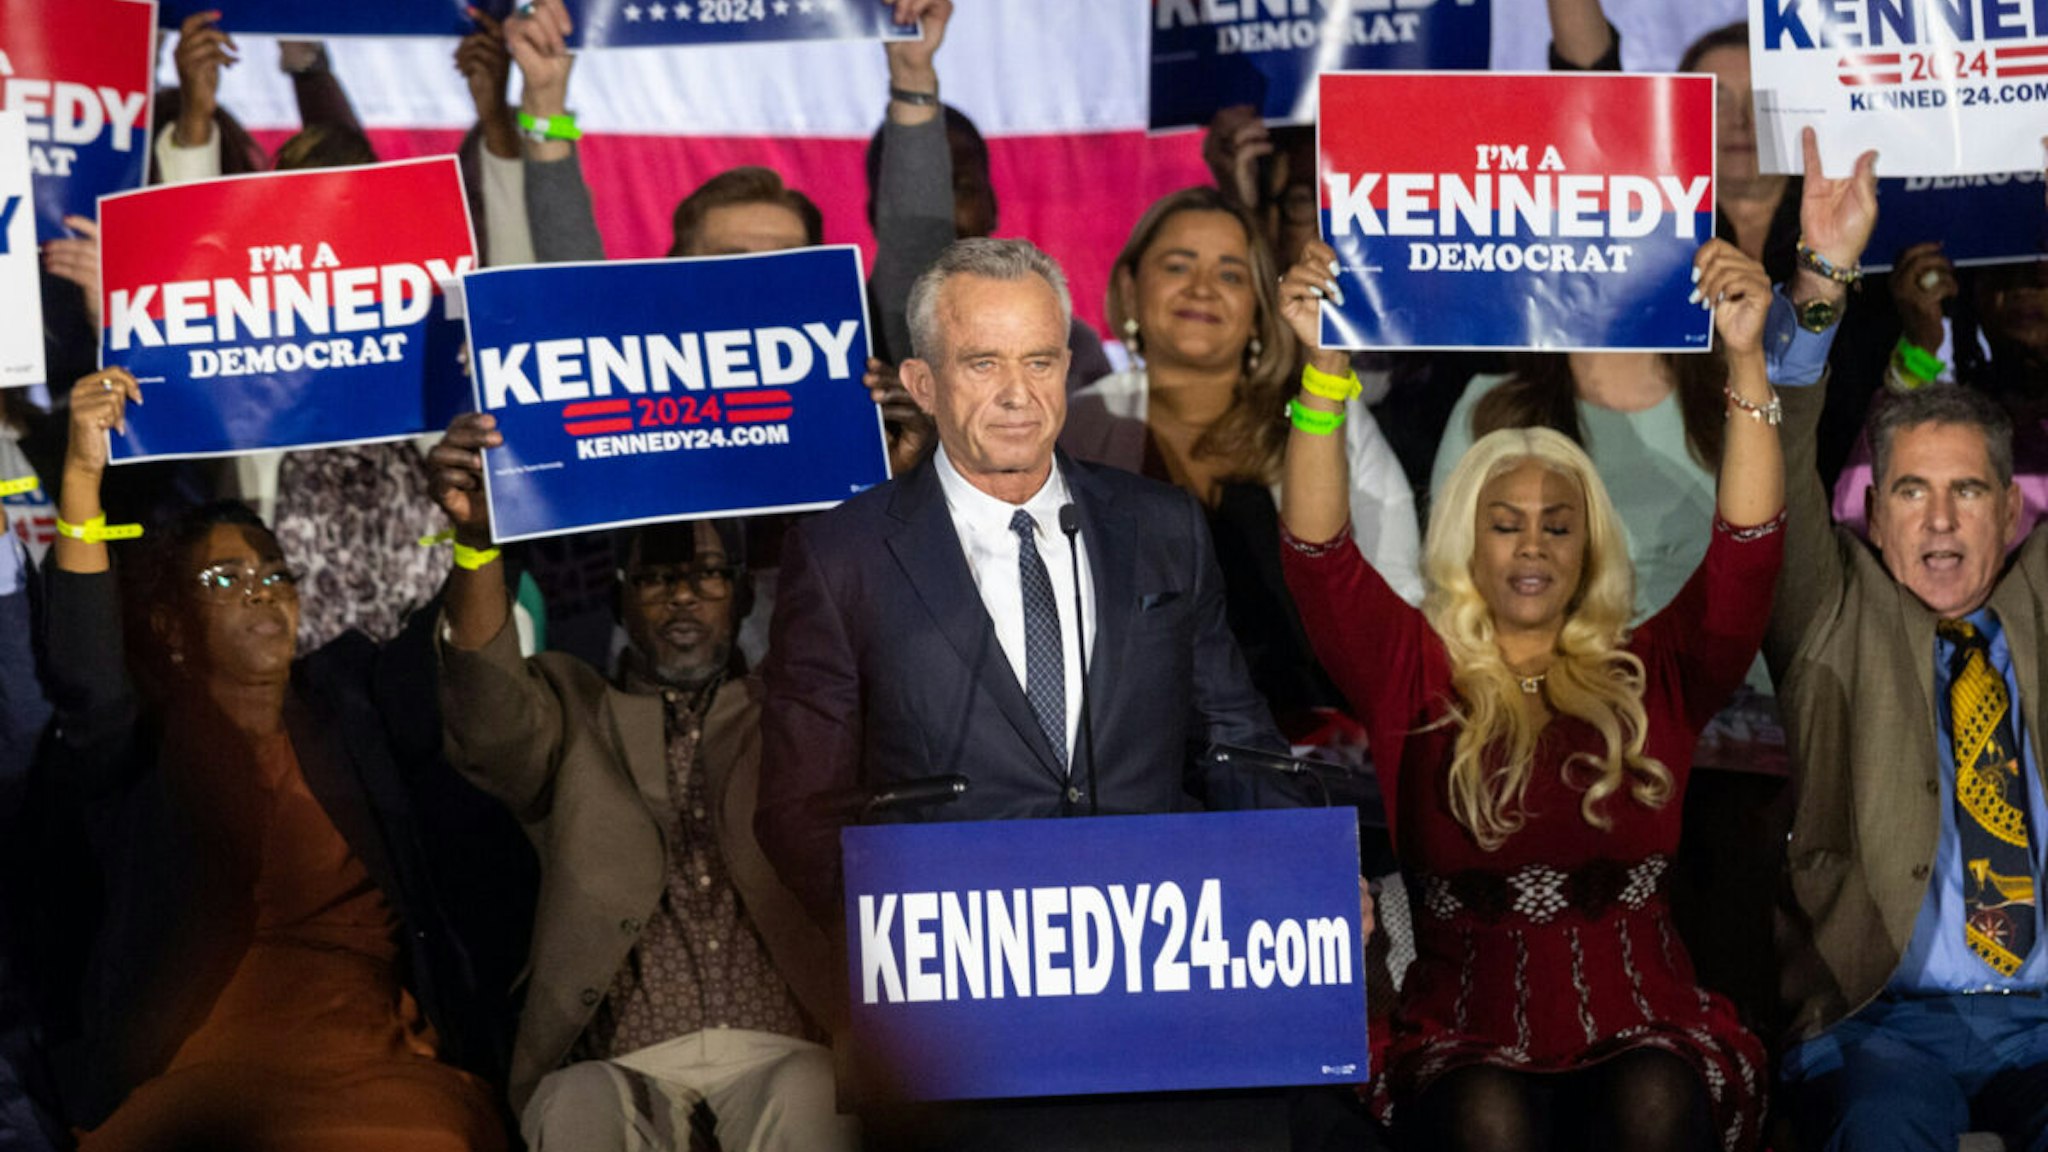 BOSTON, MA - APRIL 19: Robert F. Kennedy Jr. officially announces his candidacy for President on April 19, 2023 in Boston, Massachusetts. An outspoken anti-vaccine activist, RFK Jr. joins self-help author Marianne Williamson in the Democratic presidential field of challengers for 2024.